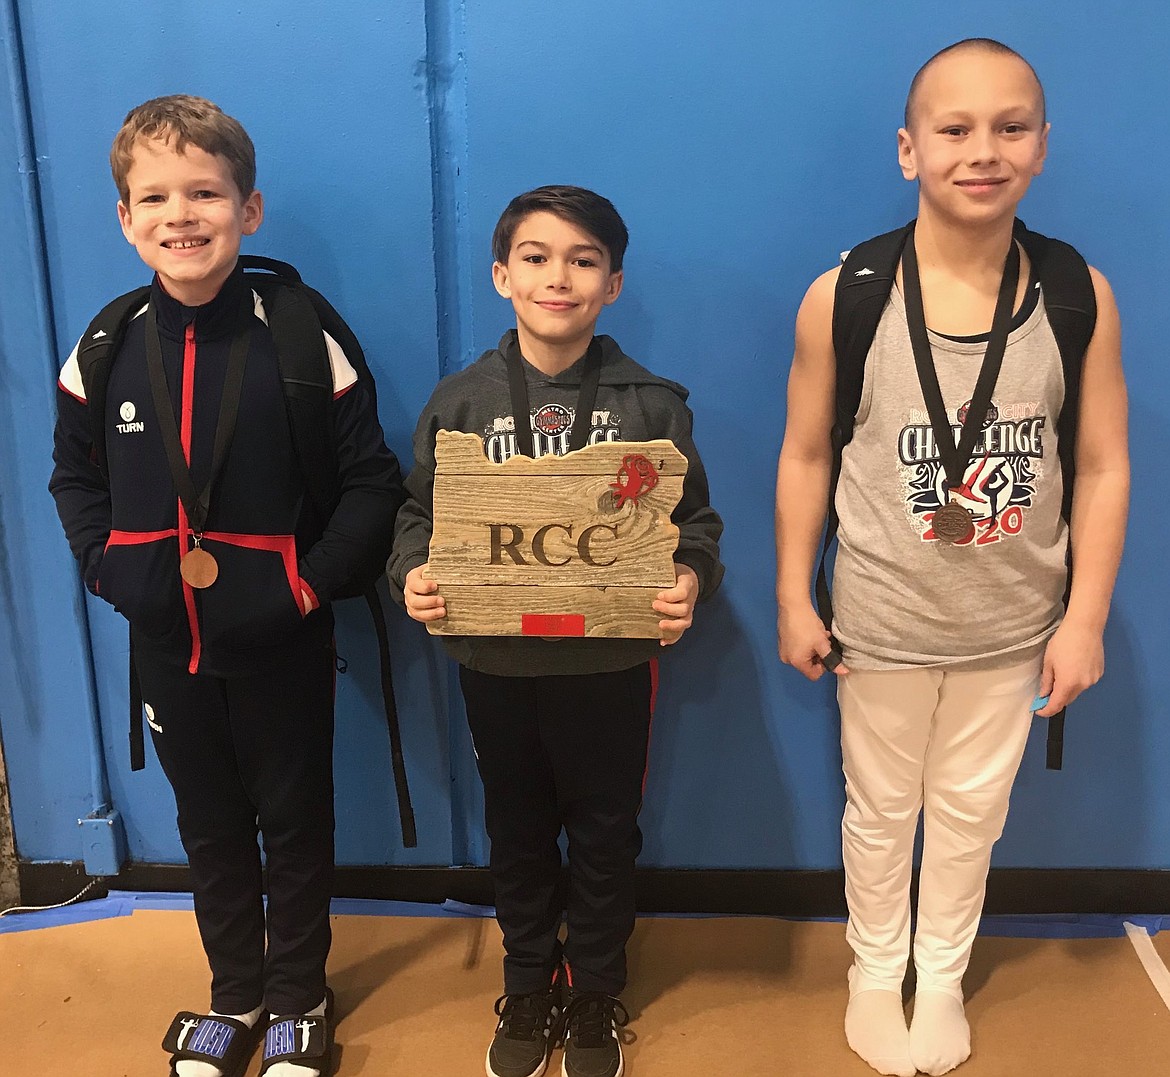 Avant Coeur Gymnastics Level 6 Boys took 3rd Place Team at the Rose City Challenge in Beaverton, Ore., on Feb. 29. From left are Hudson Petticolas, Dylan Coulson and Conan Tapia.